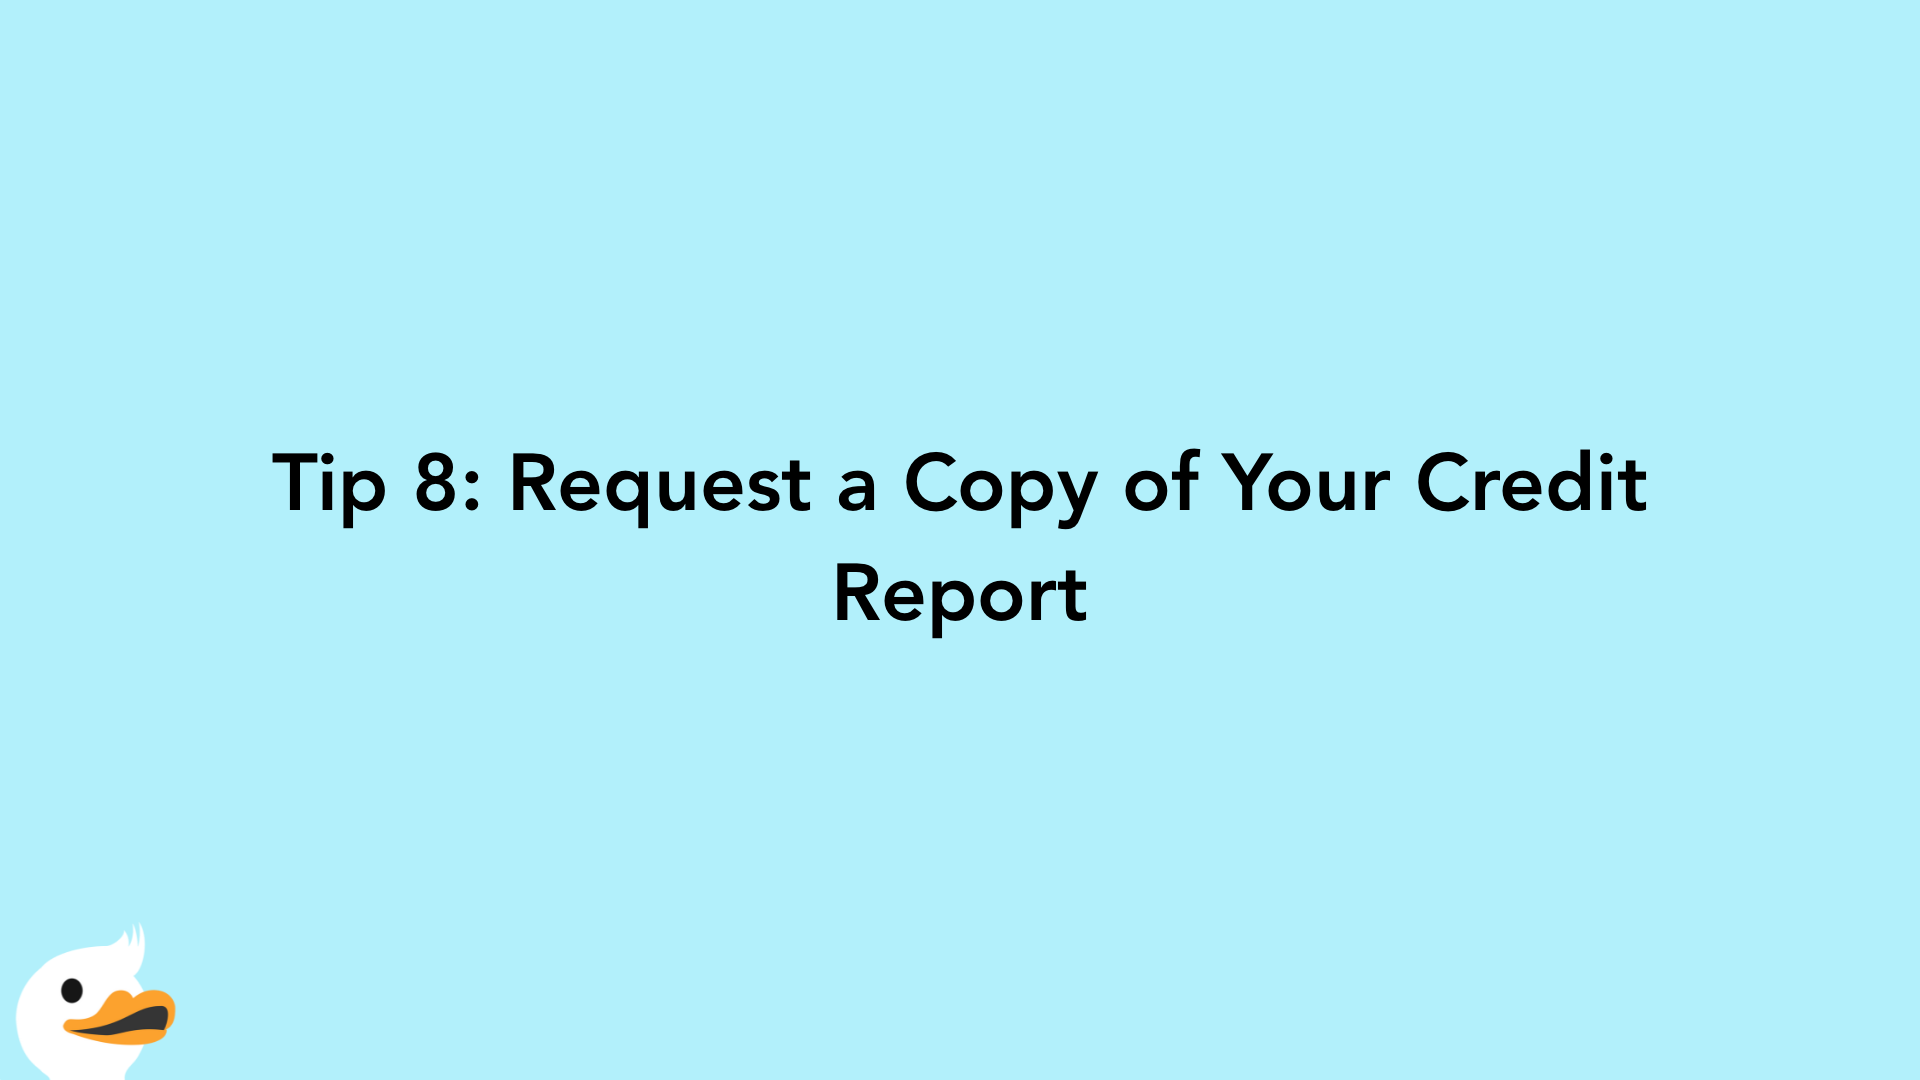 Tip 8: Request a Copy of Your Credit Report